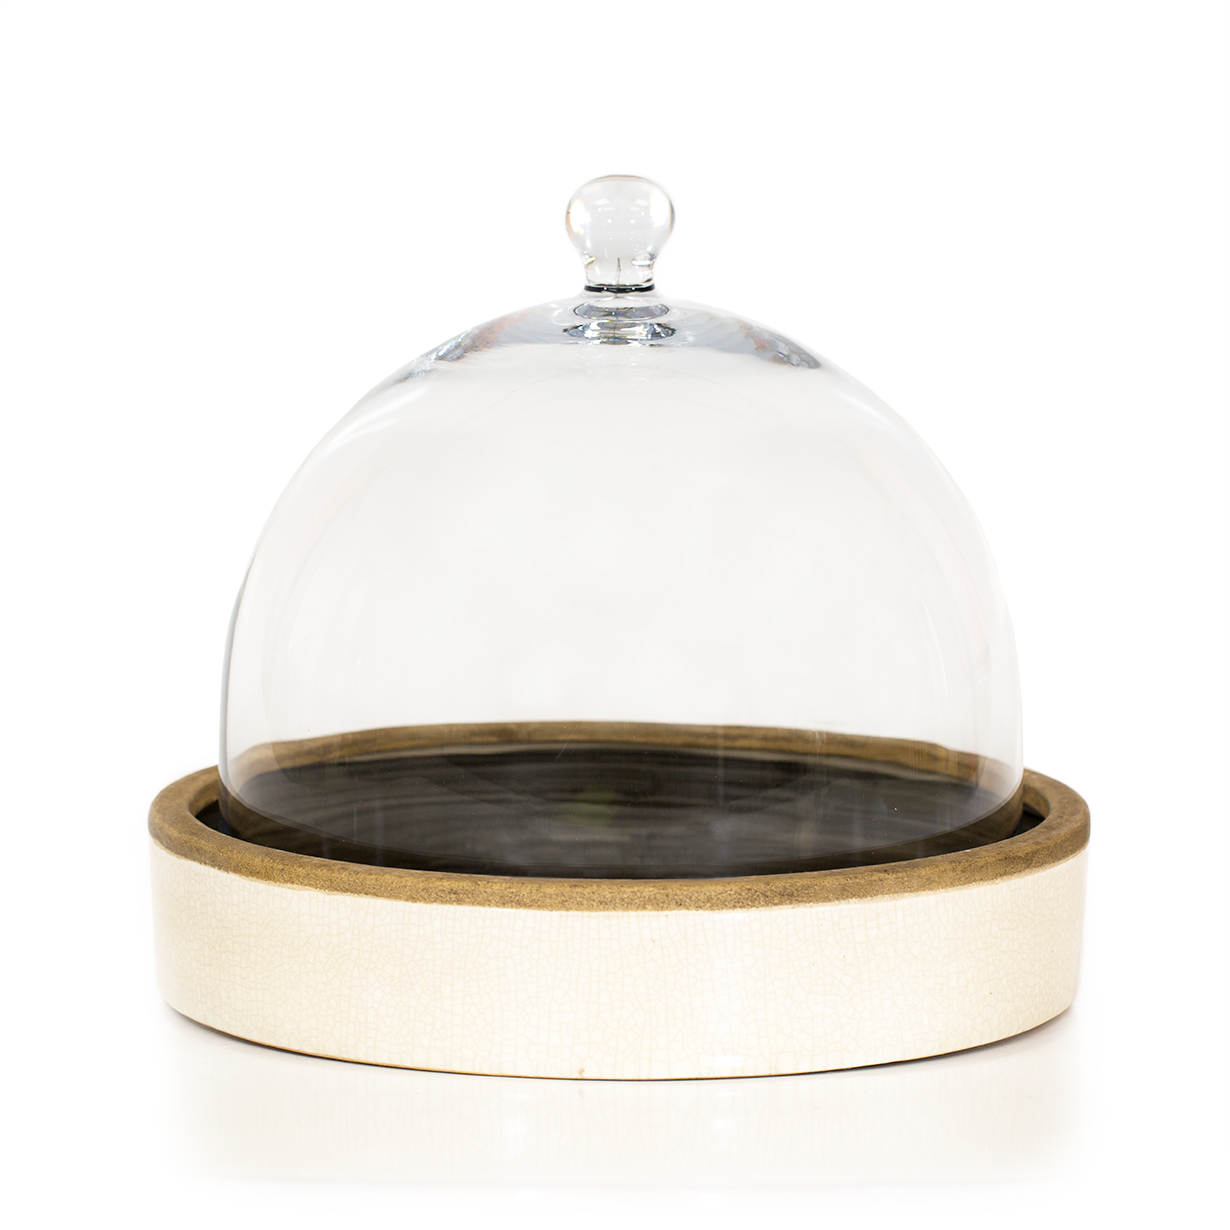 Ceramic Round Tray with Cloche (Large)